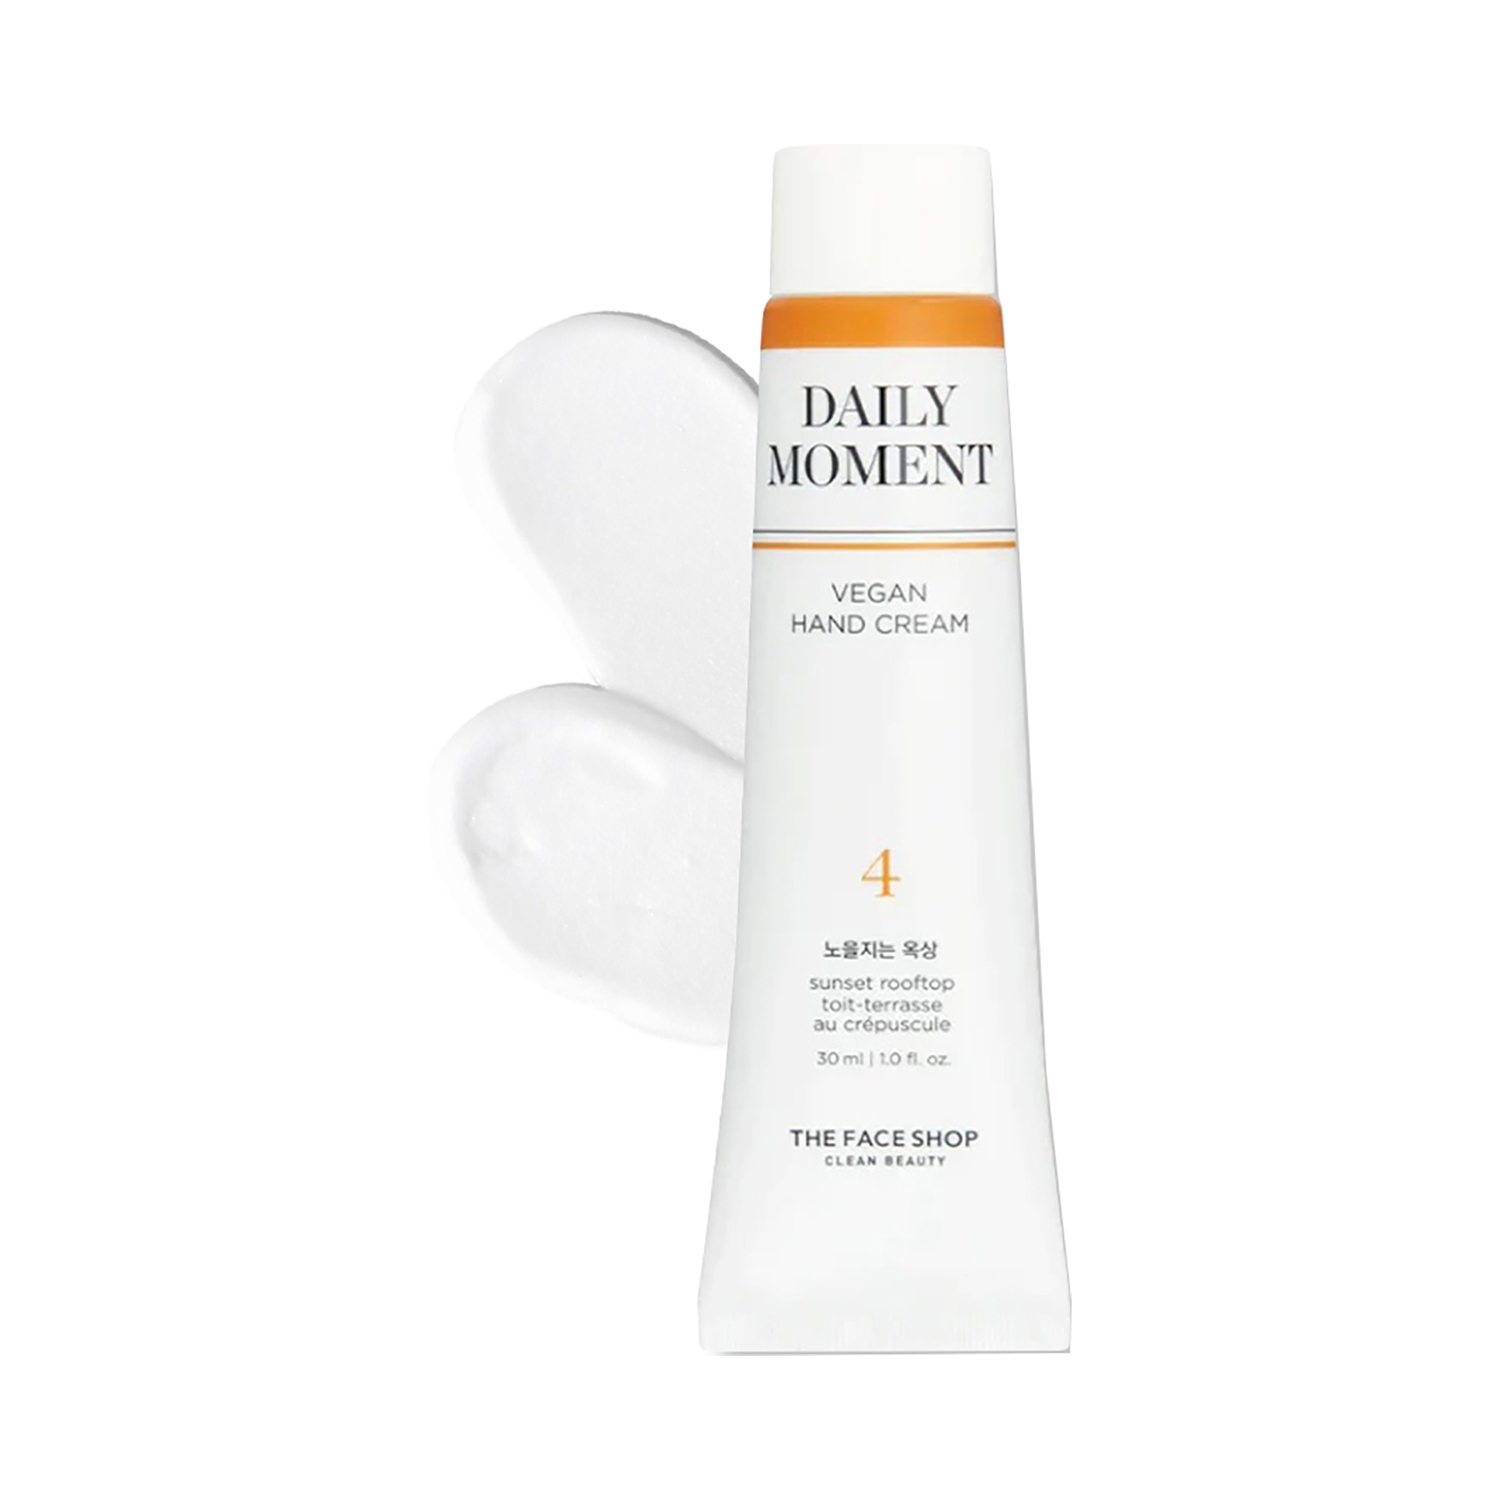 The Face Shop | The Face Shop Daily Moment 04 Sunset Rooftop Vegan Hand Cream (30ml)